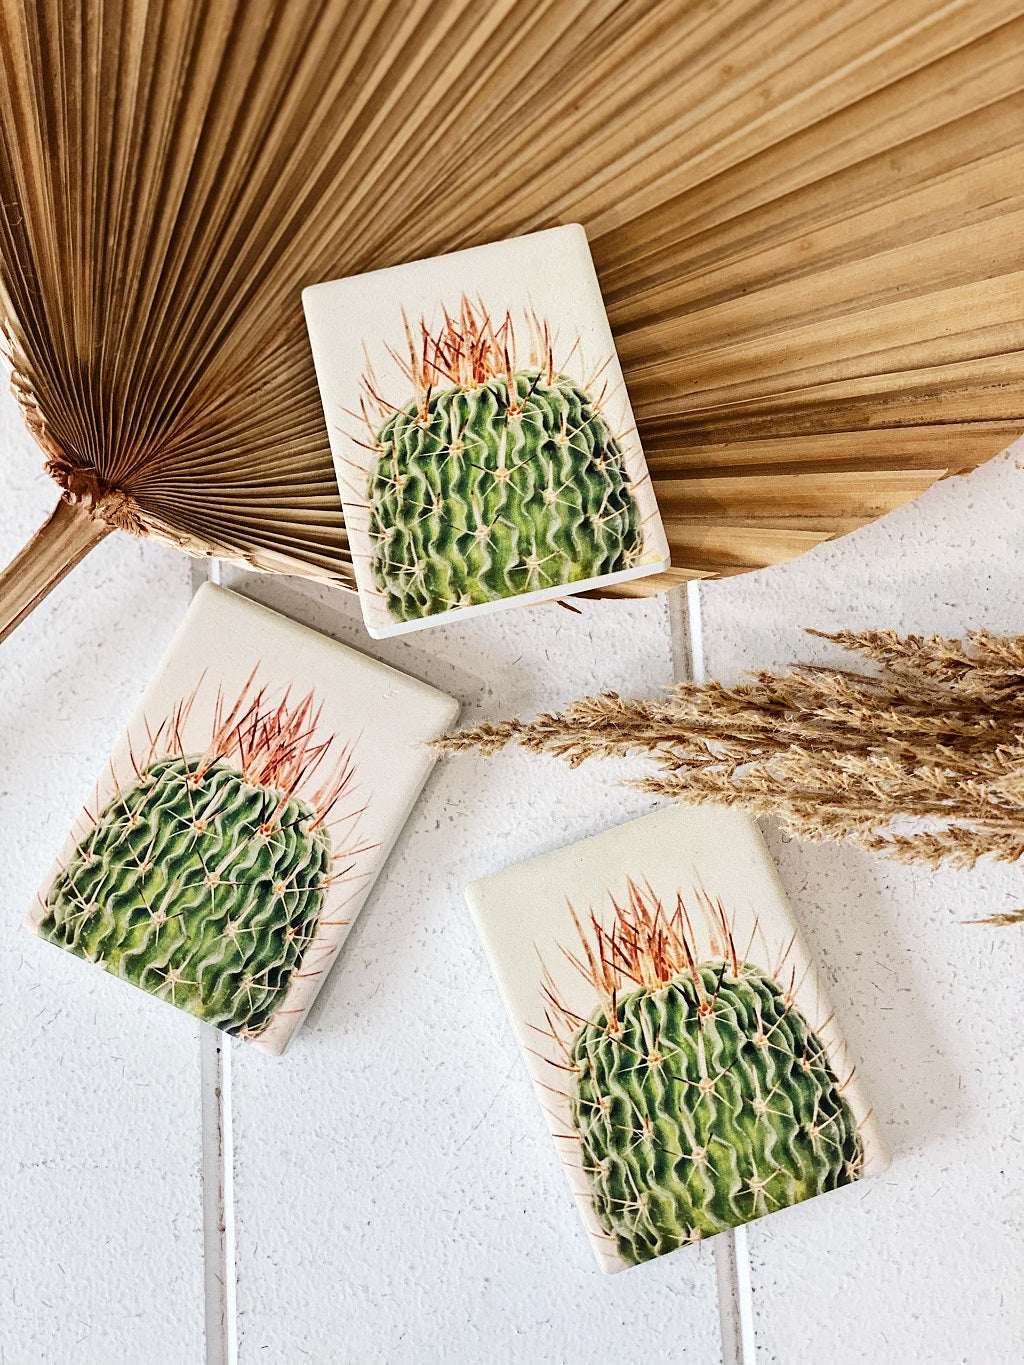 The Natural Oasis “Spiky Ceramic Magnet” is the perfect way to show you care. This magnet is the sweetest gift as a small token of appreciation. 6.2cm x 8.2cm. Spike cactus. Shop online. AfterPay available. Australia wide Shipping | Bliss Gifts & Homewares - Unit 8, 259 Princes Hwy Ulladulla - 0427795959, 44541523